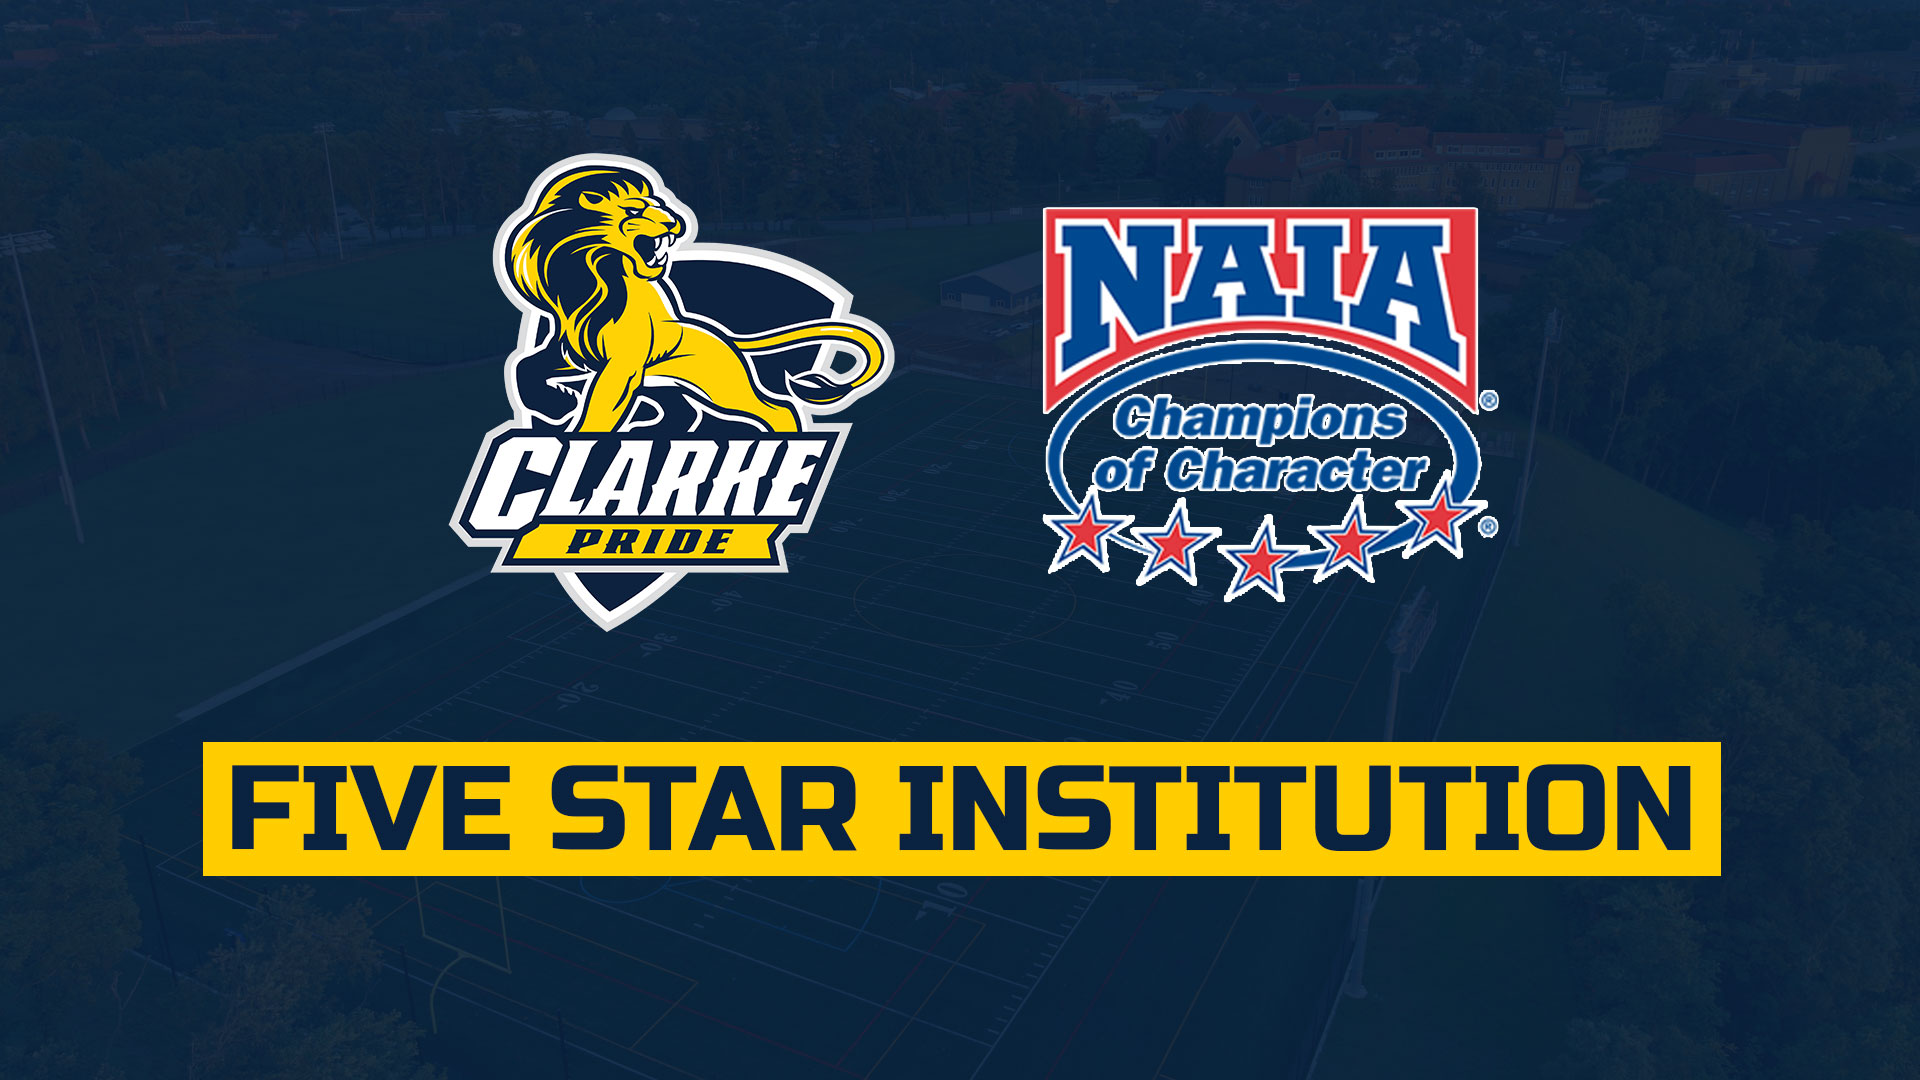 Clarke Pride Logo
NAIA Champions of Character Logo
Five Star Institution